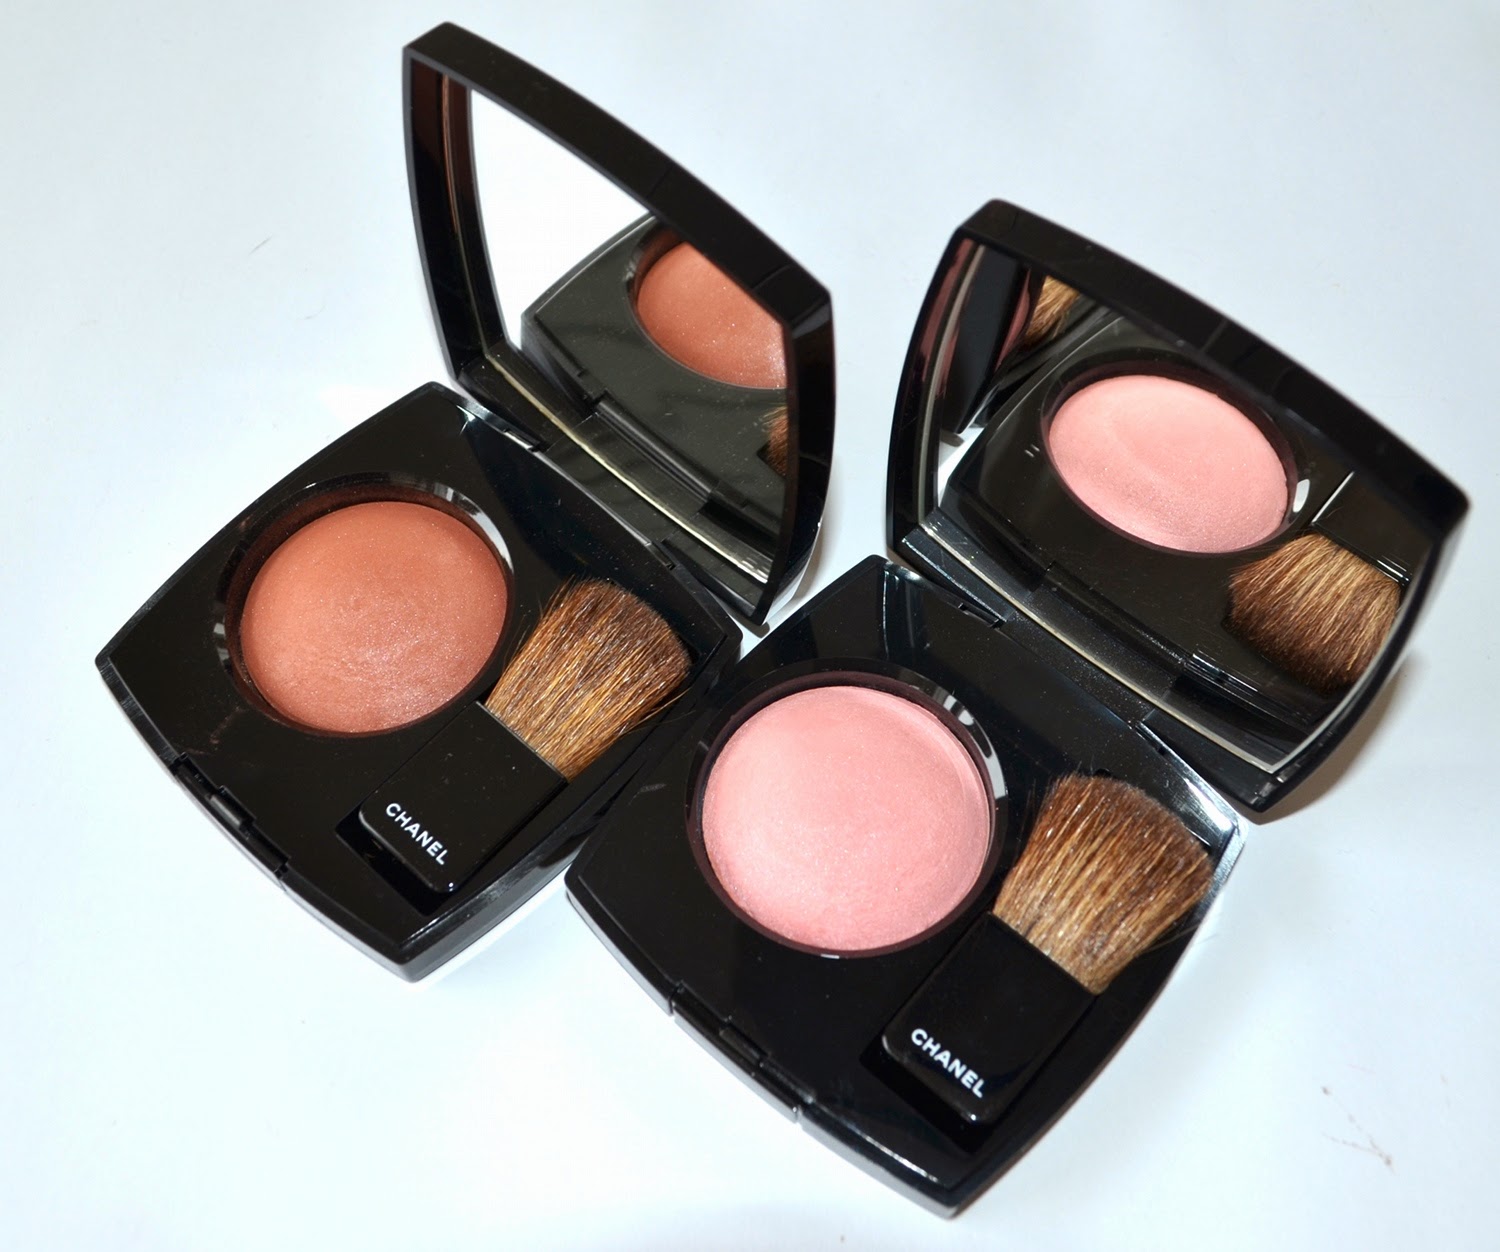 Joues Contraste in #85 Evocation & #86 Discretion, Two New Powder